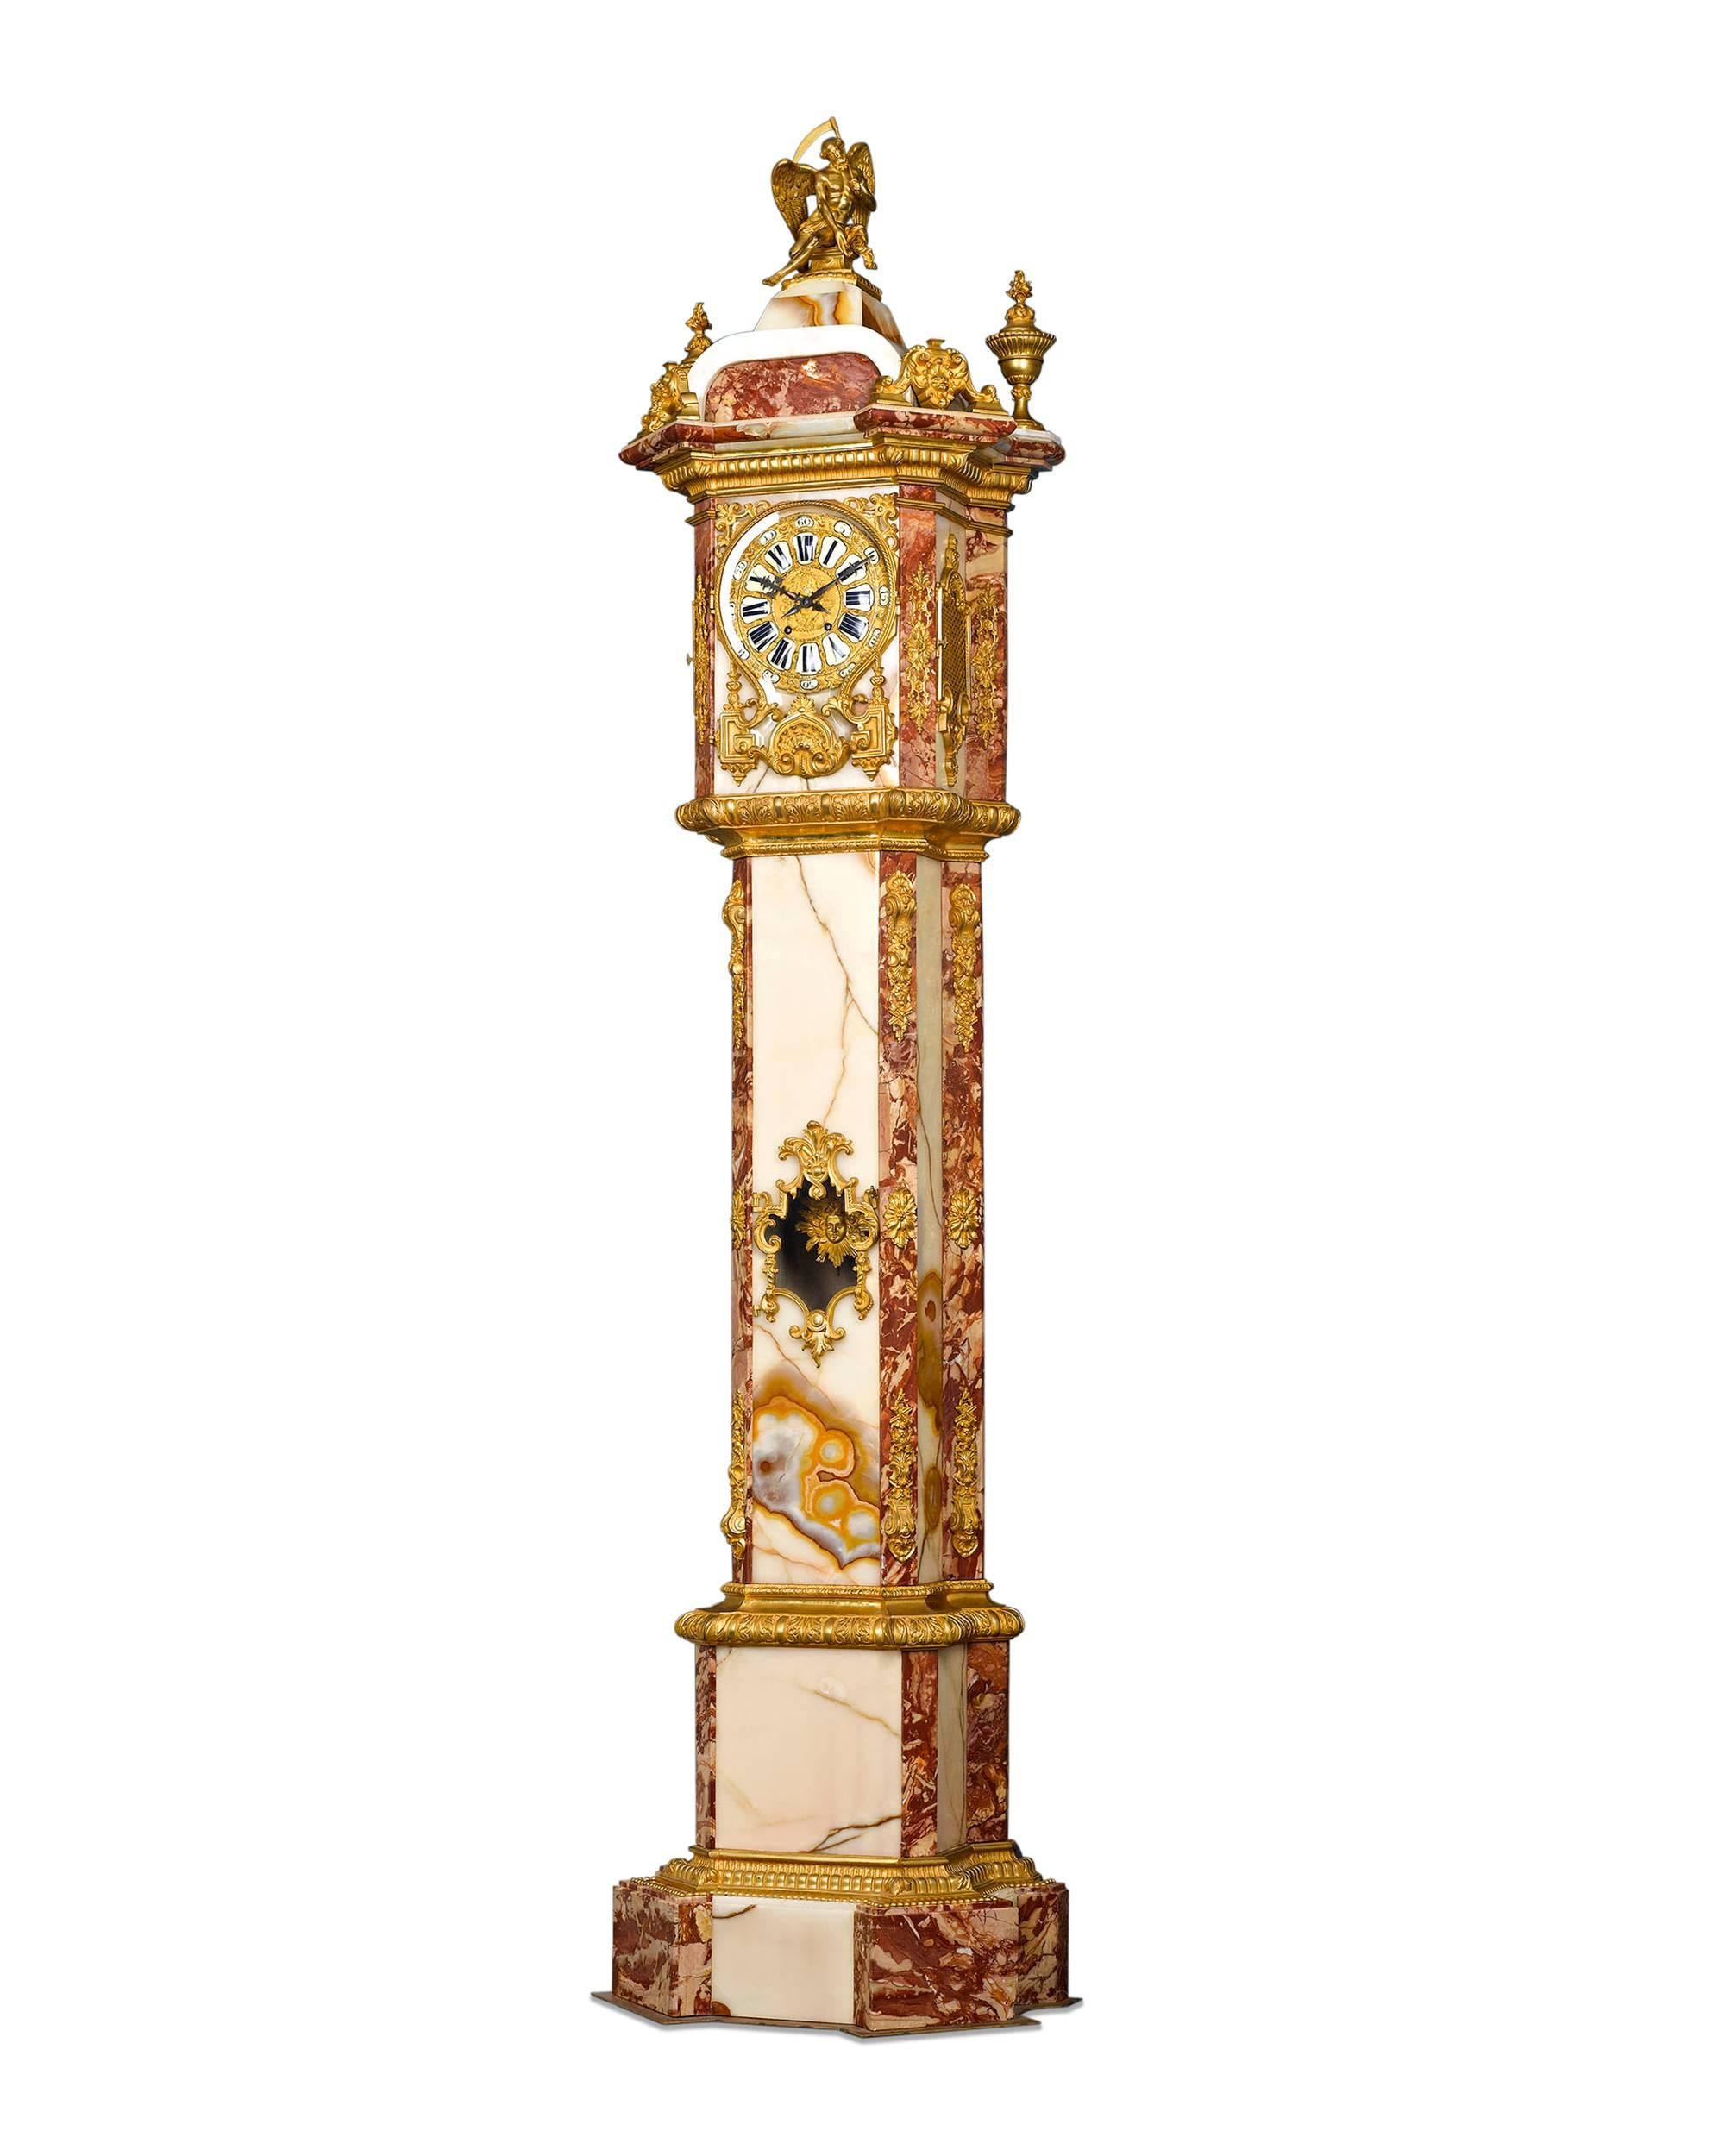 As much of a sculptural work of art as a majestic timepiece, this monumentally-sized Napoleon III longcase clock is crafted of exquisite Algerian onyx and rouge marble. Based Upon the luxurious materials and stunning size, this timepiece was almost